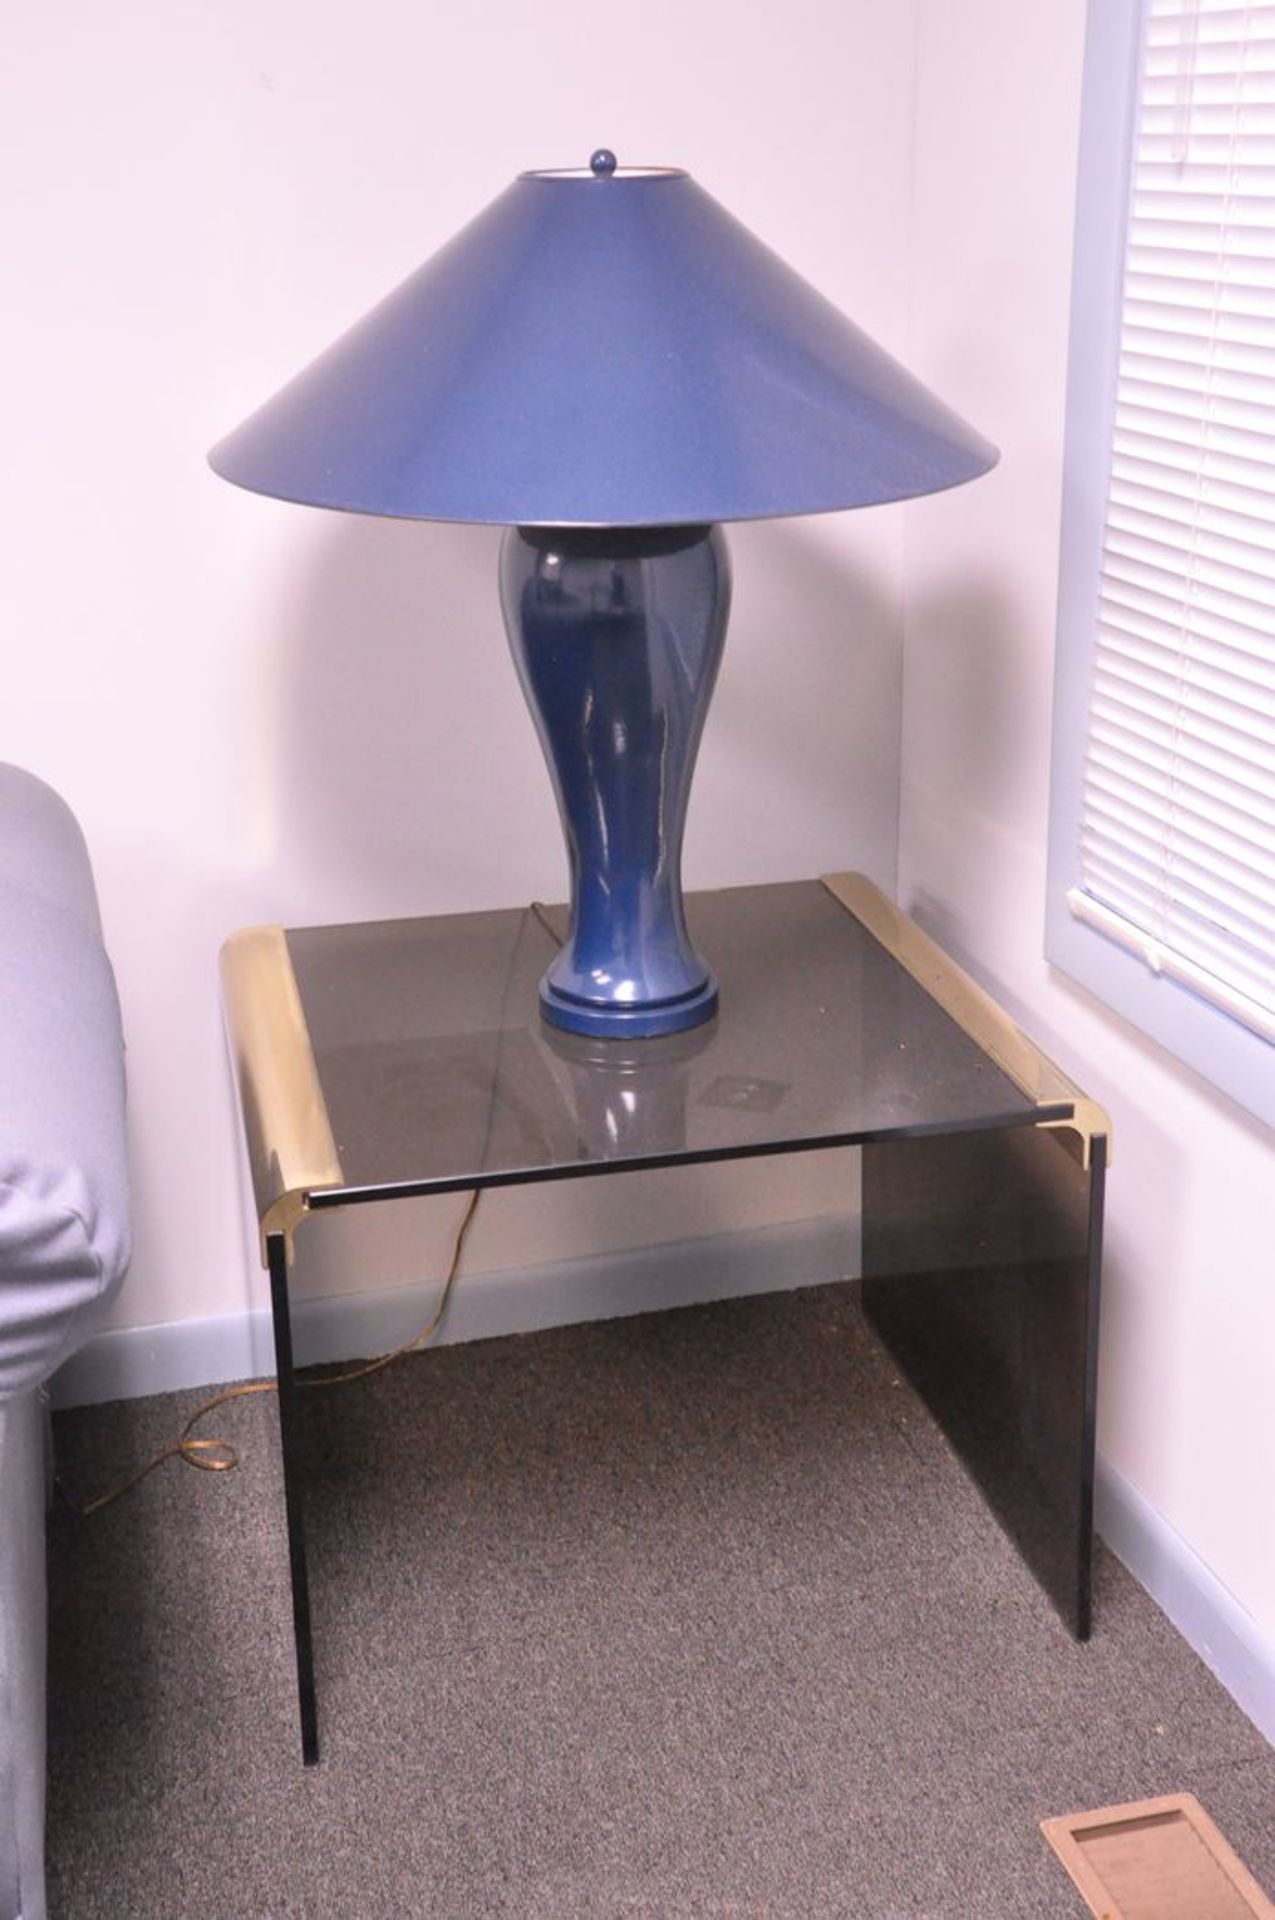 Lot - Sofa, End Table, Round Table, Chair and Desk Lamp - Image 3 of 3